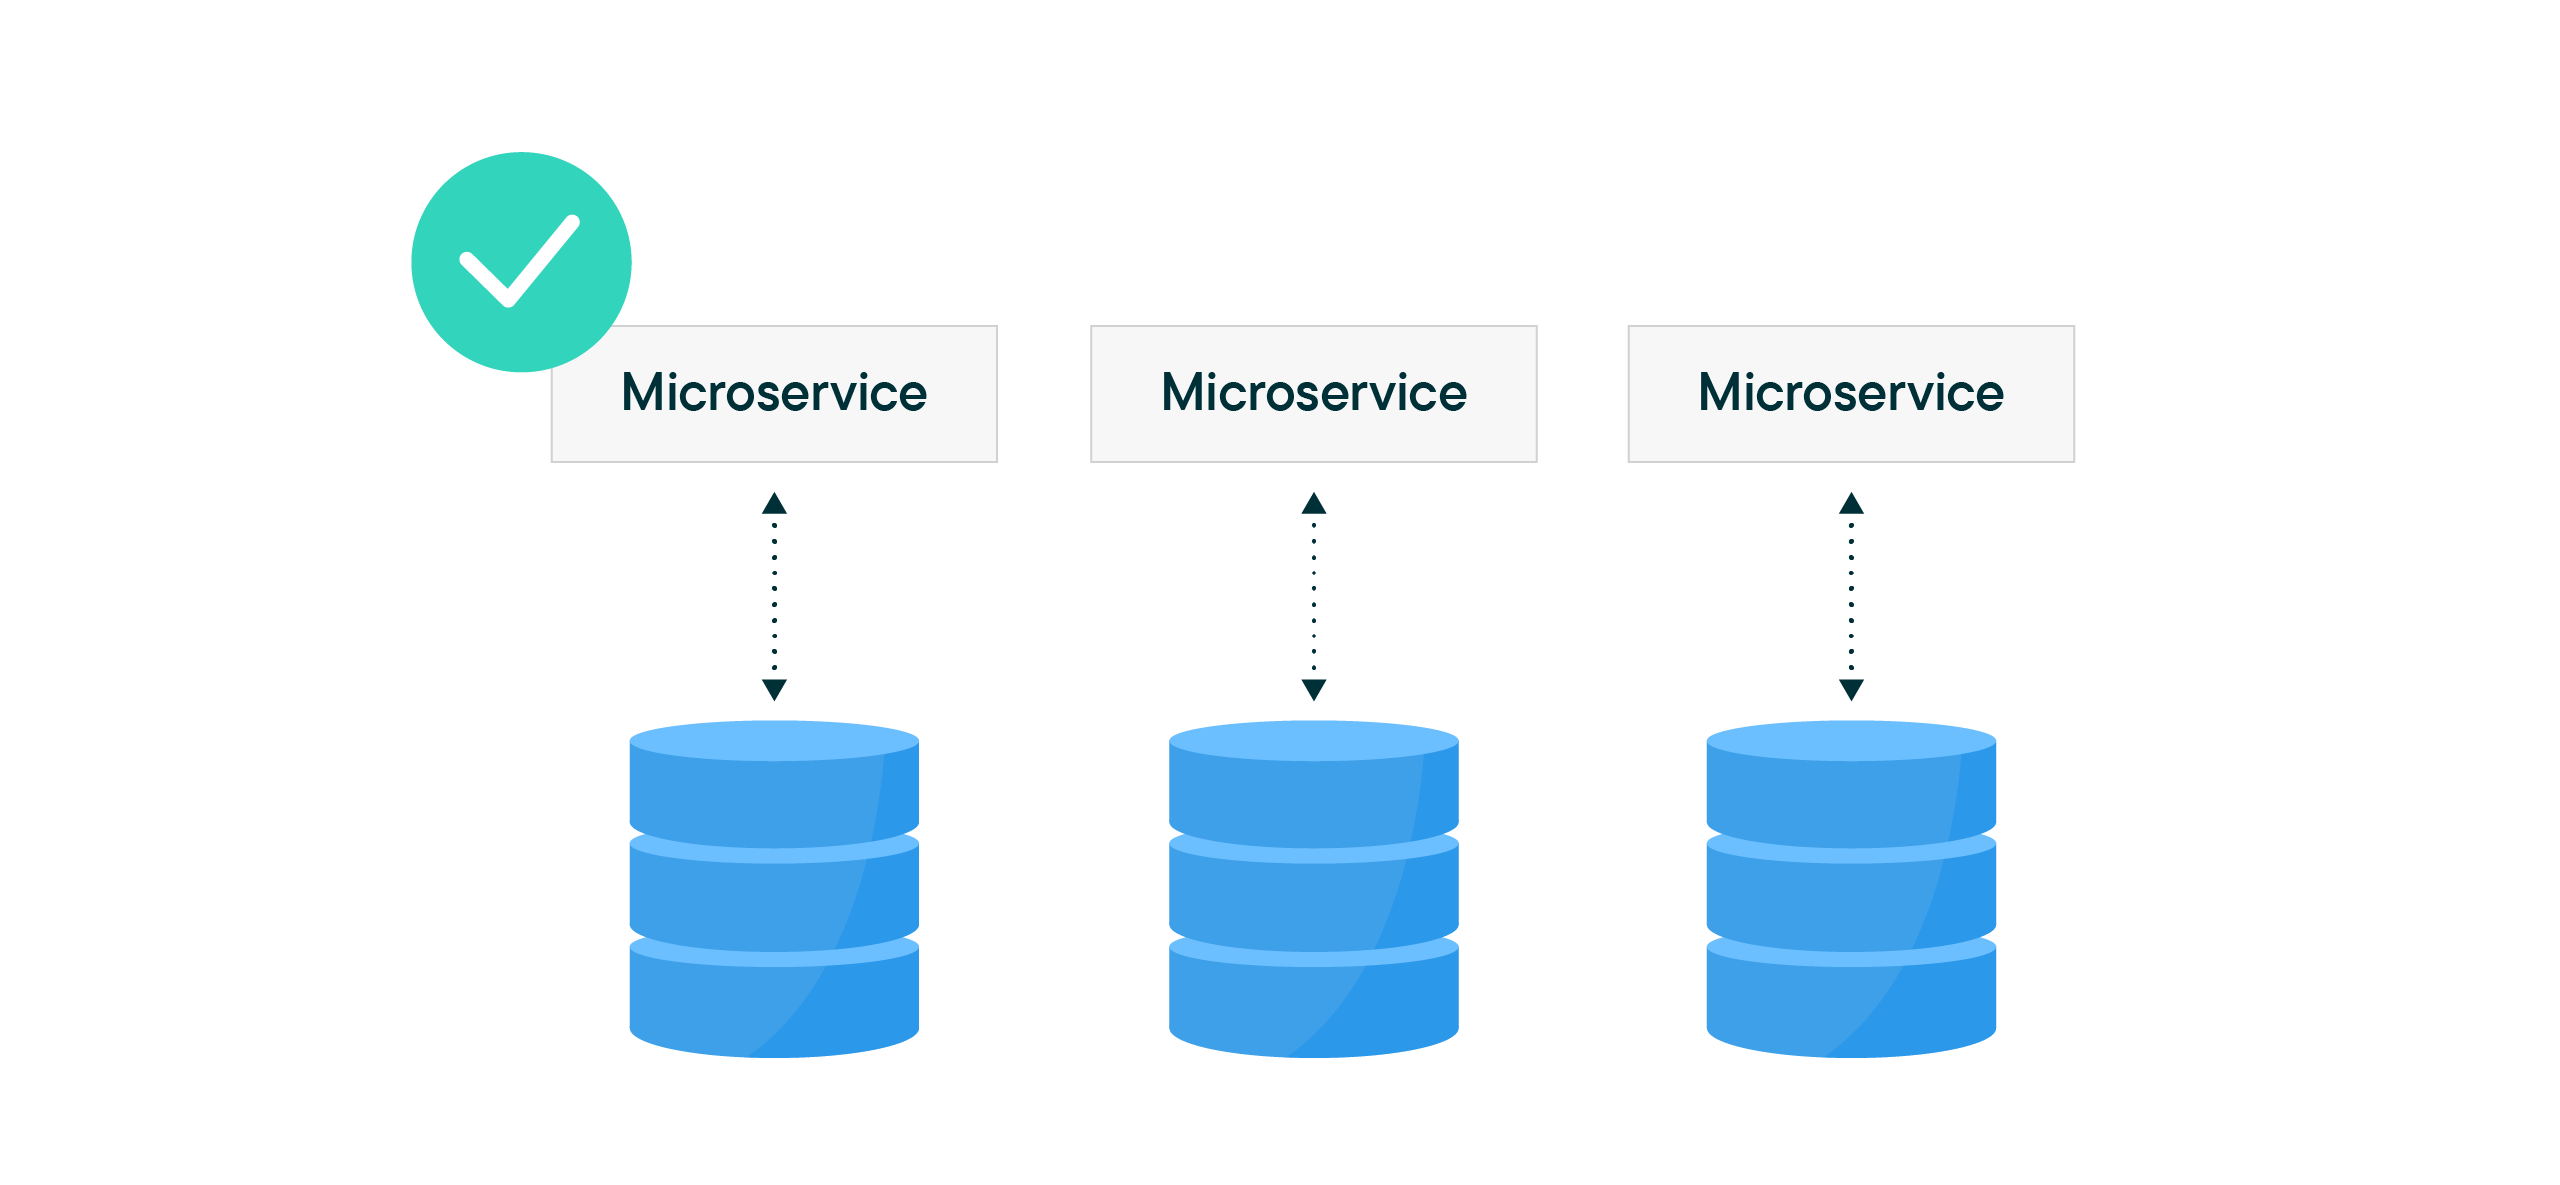 Why each microservice should own its data